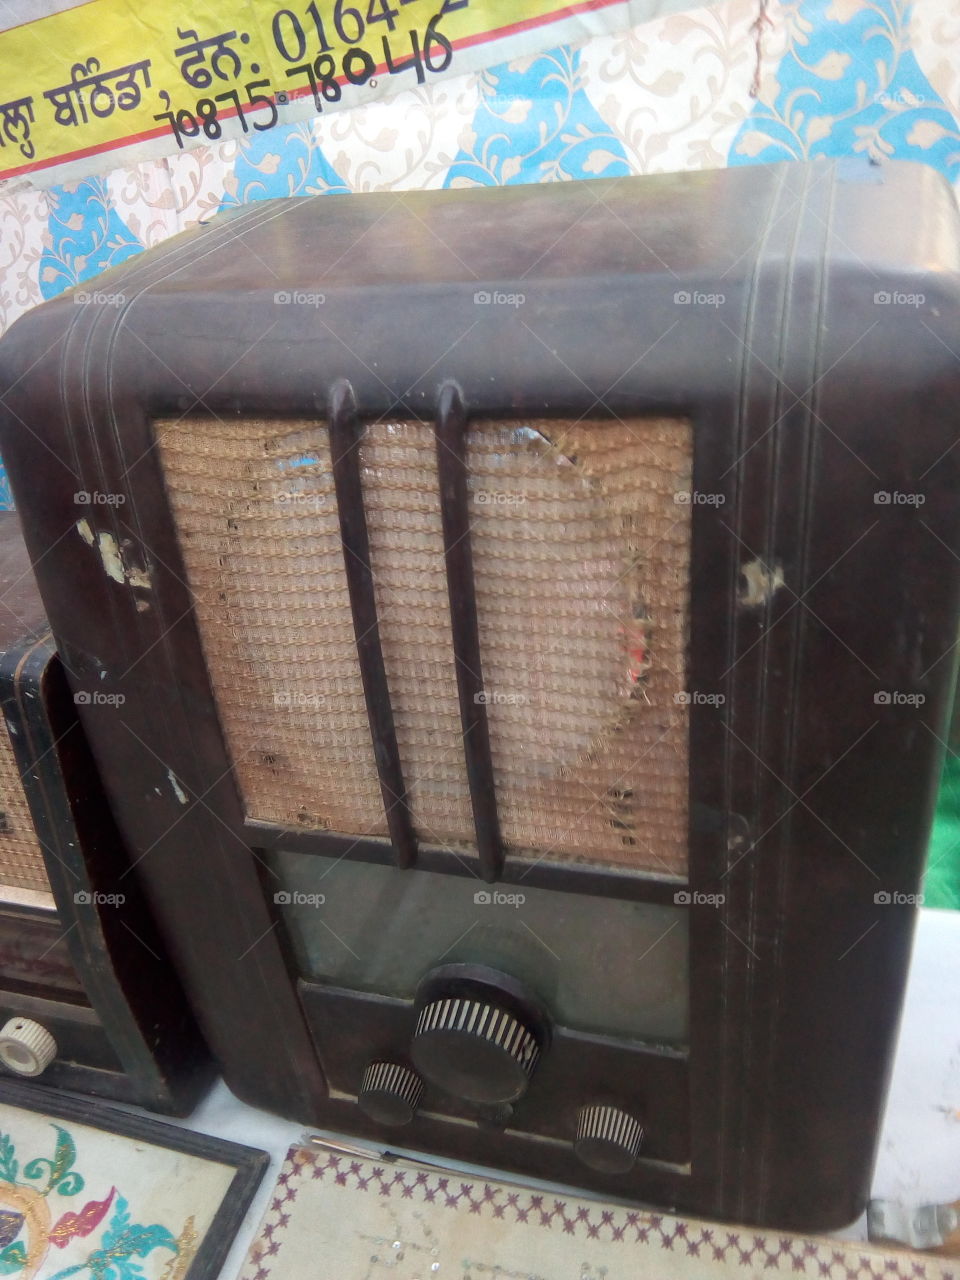 old and antique radio.